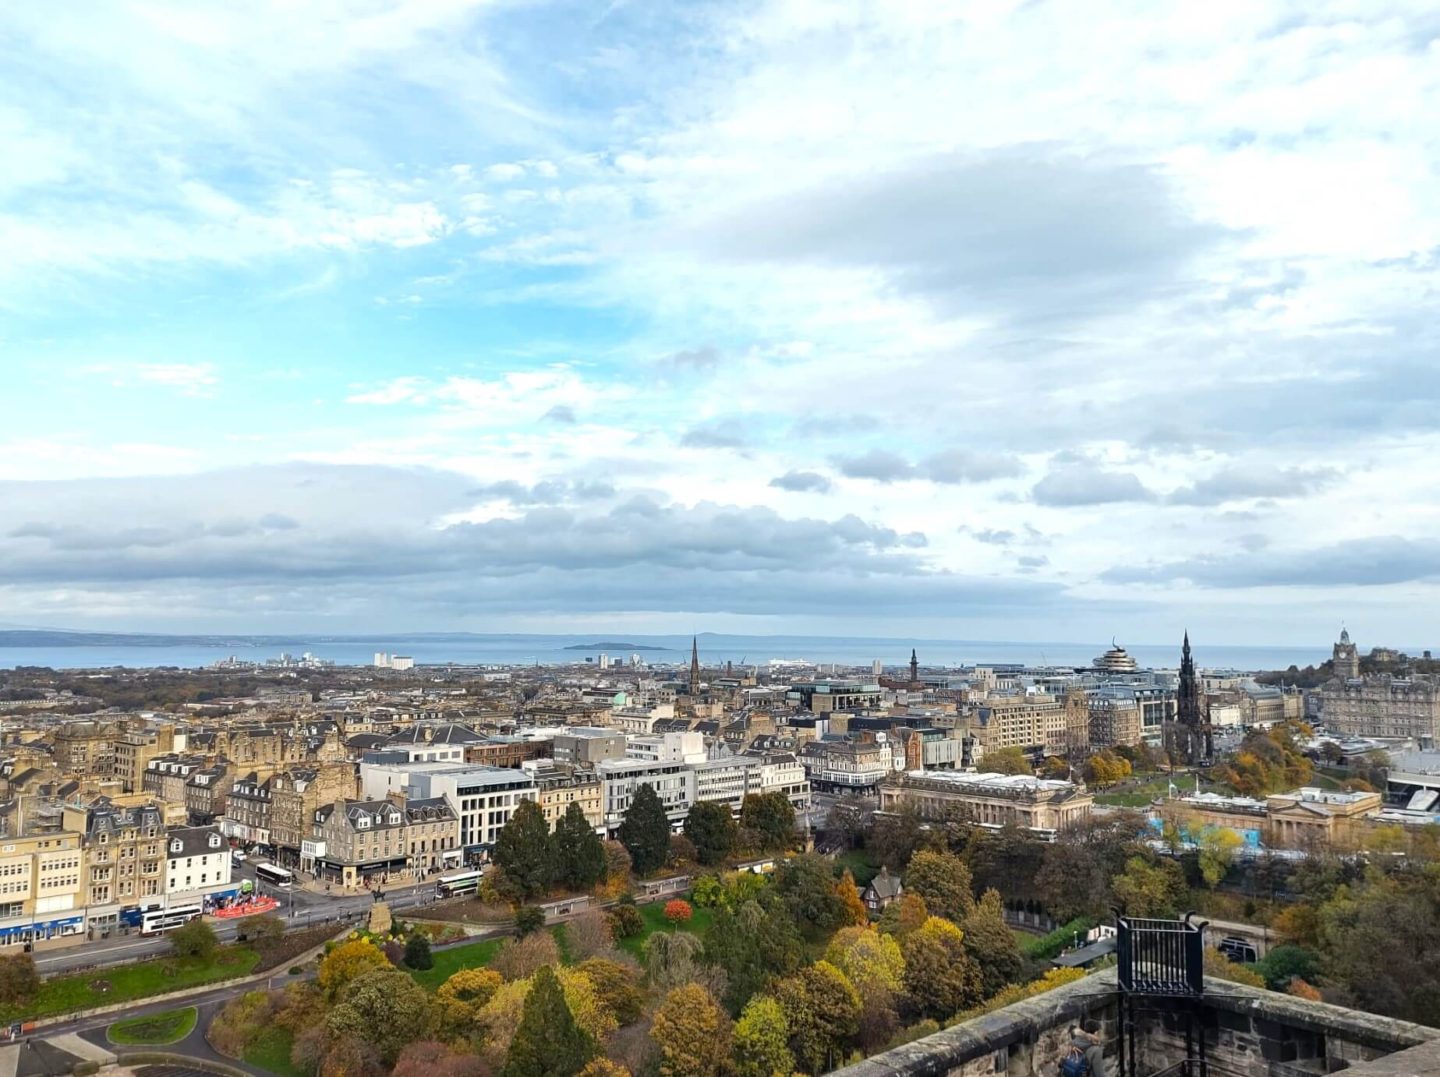 The view of Edinburgh from the top of the castle.